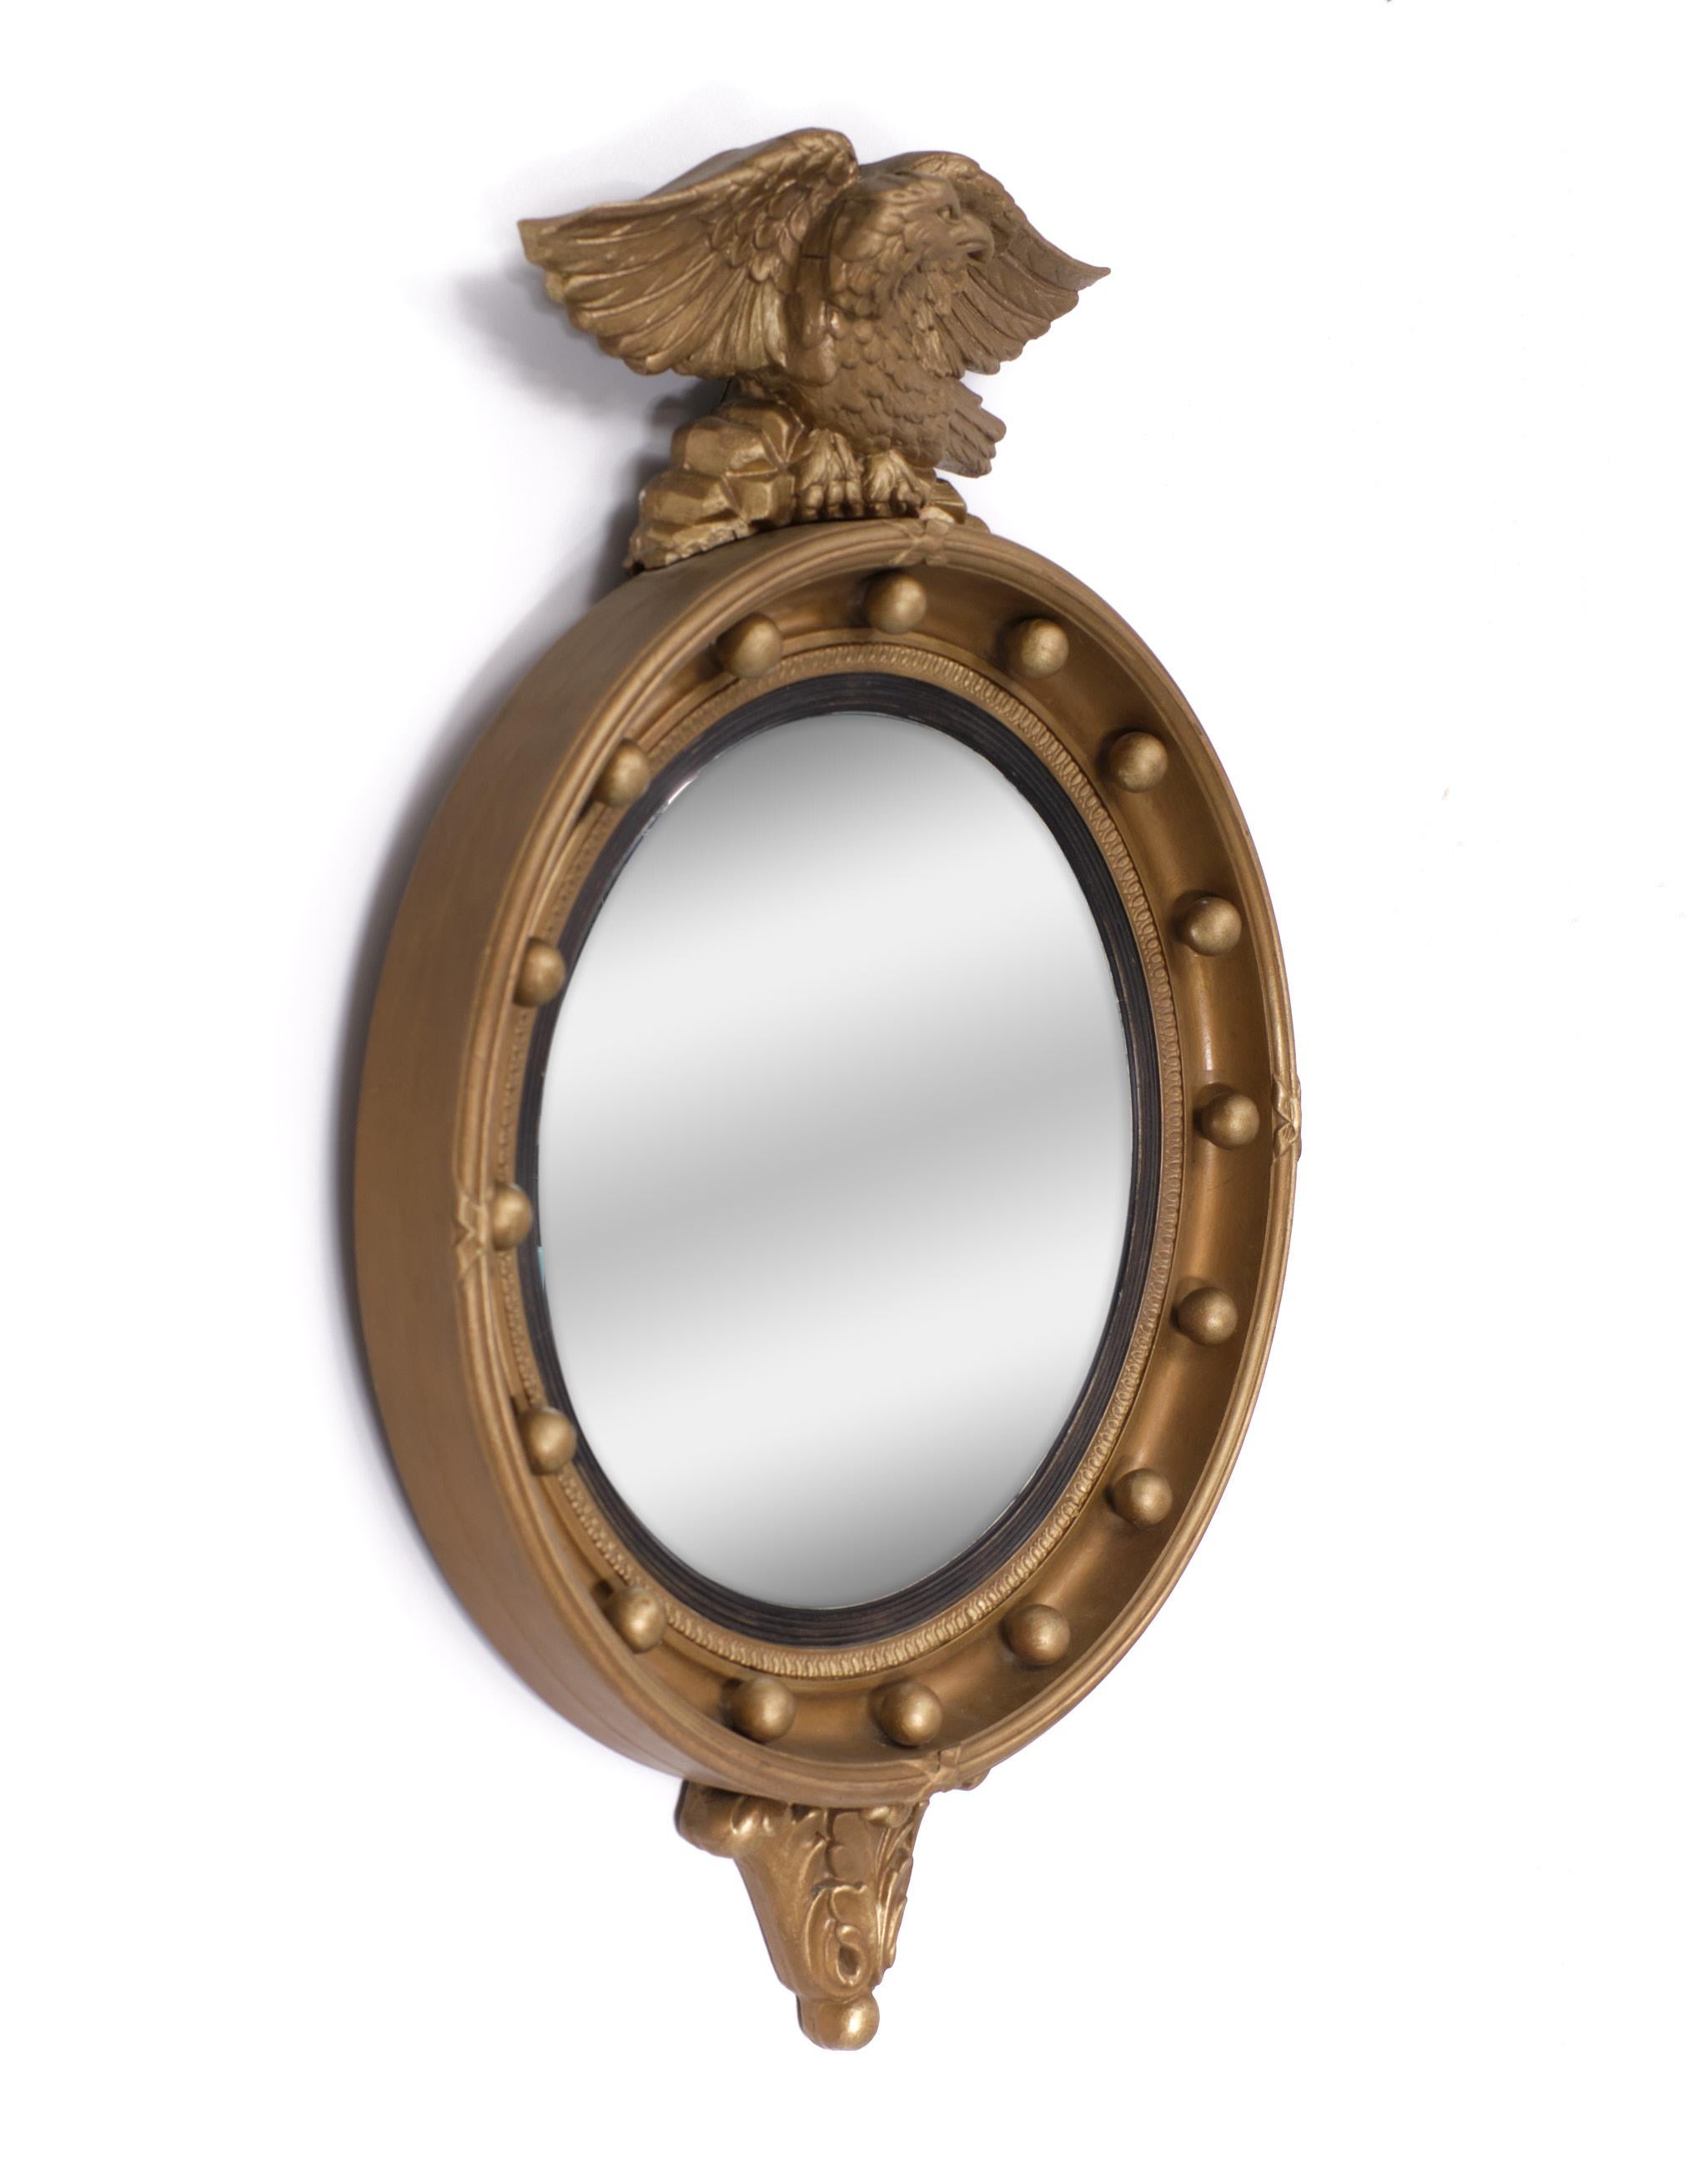 The design for this mirror was introduced in connection with the declaration of American independence. Contrary to popular belief, the eagle on top of the mirror is not German or French, but in fact the American eagle. This mirror was often made for